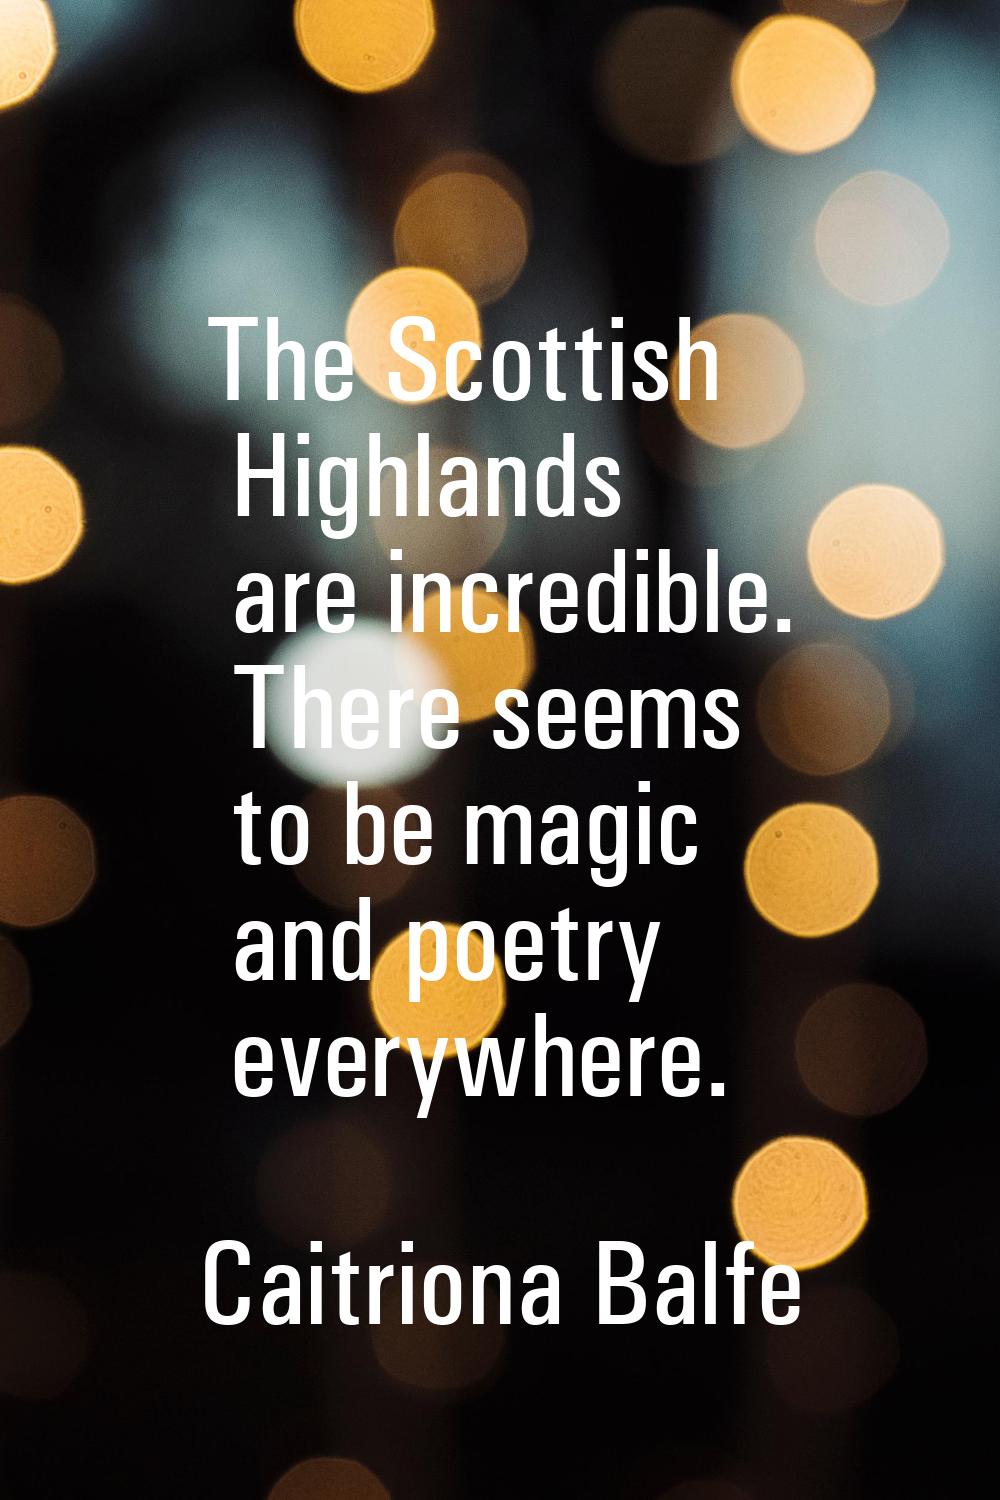 The Scottish Highlands are incredible. There seems to be magic and poetry everywhere.